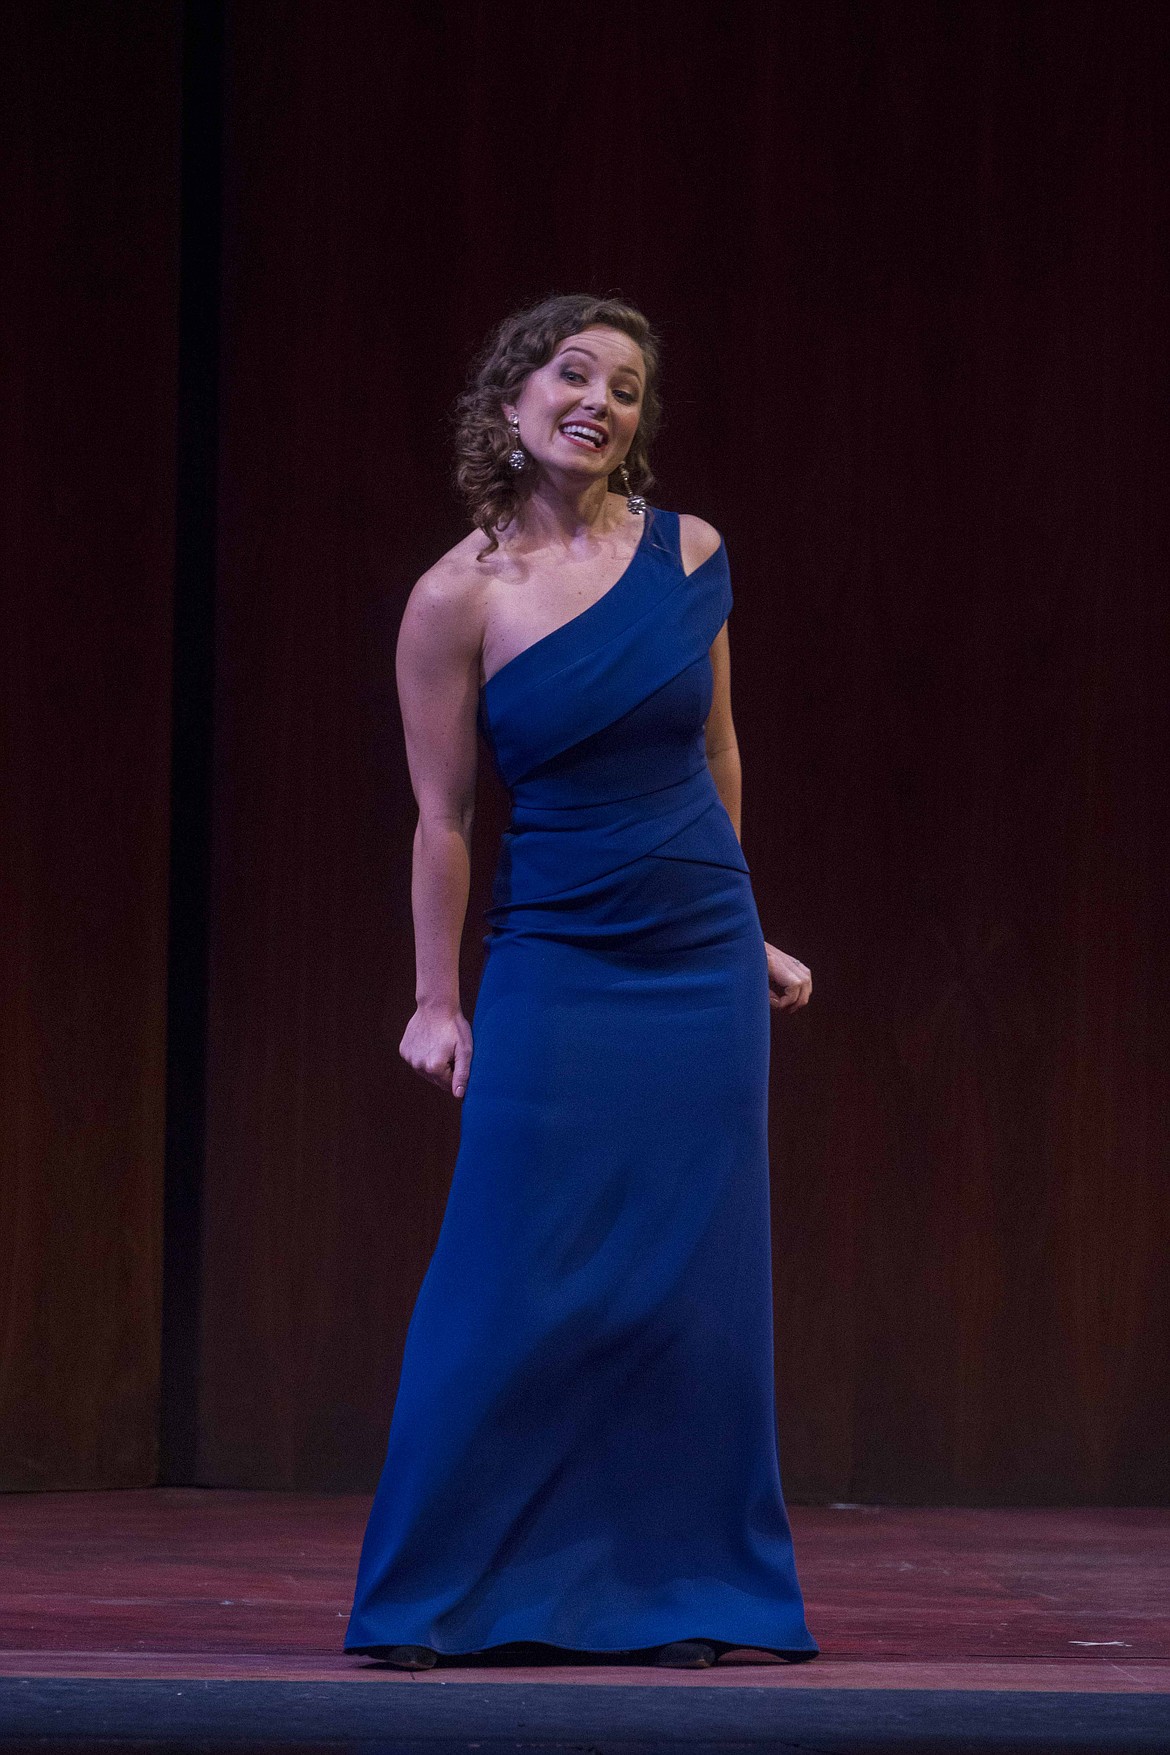 Madison Leonard, 26, performs on Sunday afternoon at the National Council Grand Finals Concert in the Metropolitan Opera in New York City. Leonard, who graduated from Coeur d'Alene High School in 2010, was announced as the winner of the Middle Atlantic Region. She will return to the Inland Northwest for a concert in Spokane in September. Photo by RICHARD TERMINE/Metropolitan Opera